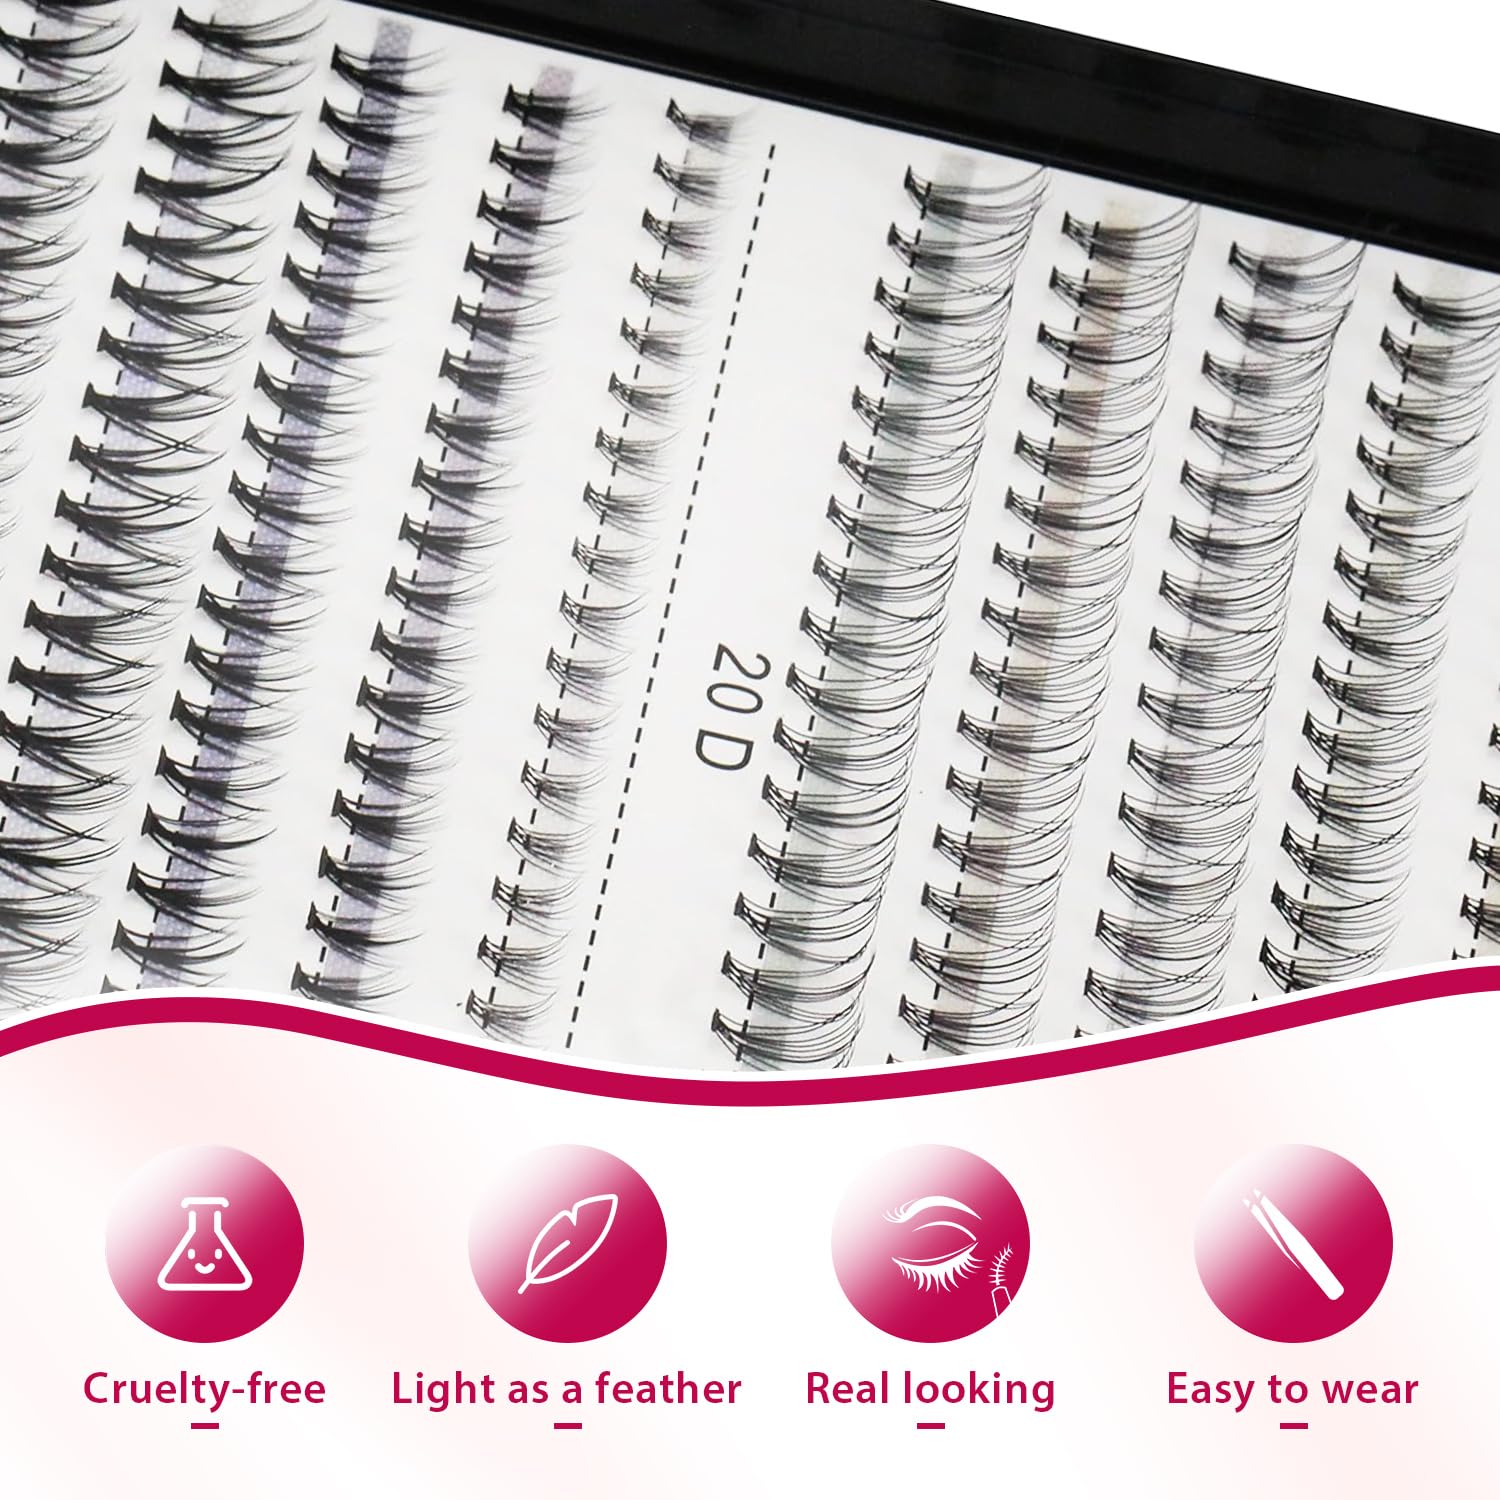 Bodermincer 240pcs C Curl 10D/20D Cluster Eyelashes 8/9/10/11/12mm and Under Eyelashes Mixed Professional Makeup Individual Cluster Eye Lashes (8/9/10/11/12mm and Under Eyelashes)